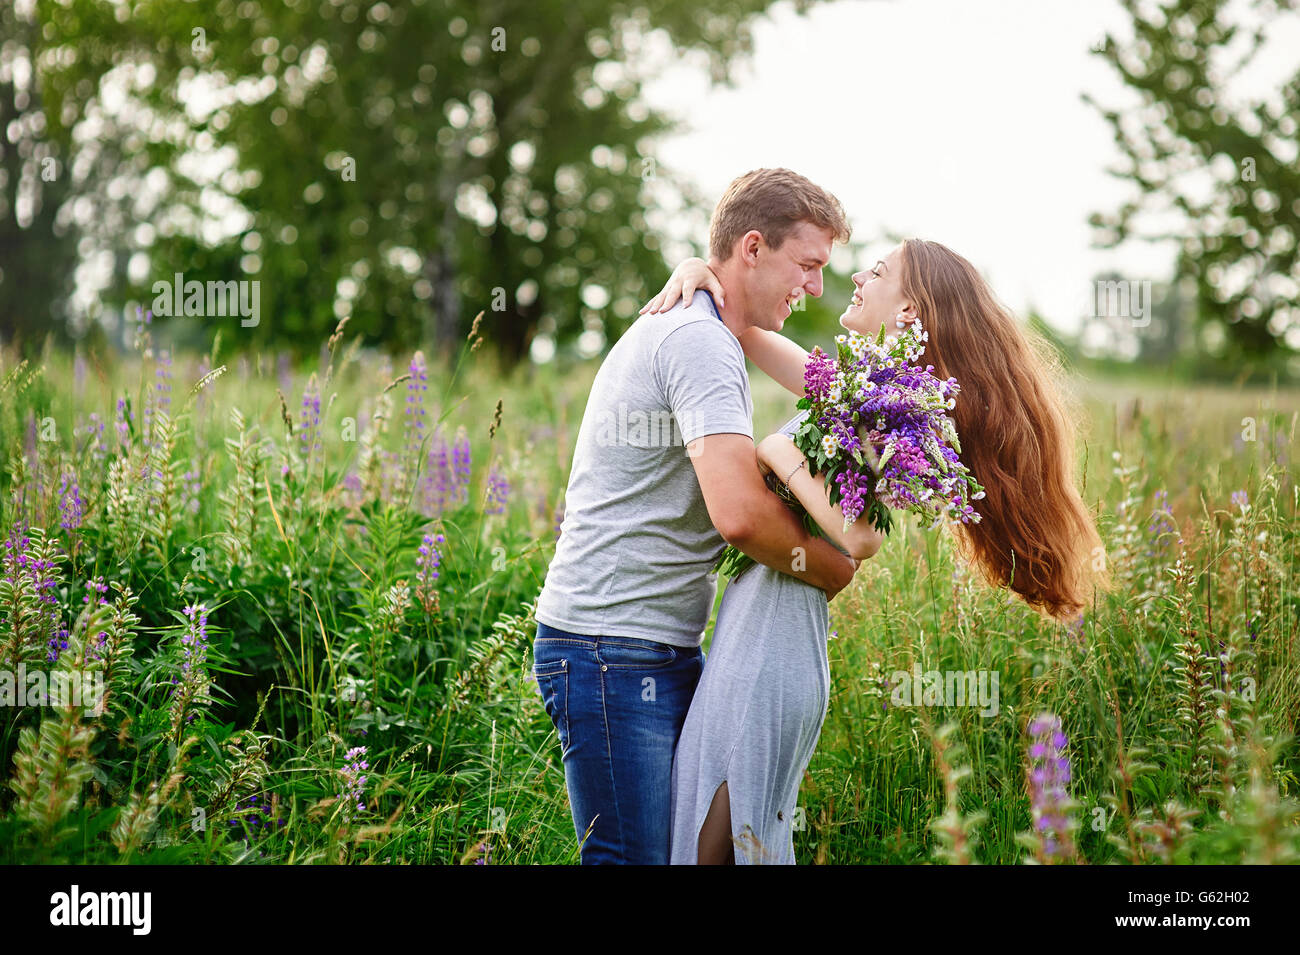 beautiful woman with long hair and a happy man hugging in field Stock Photo